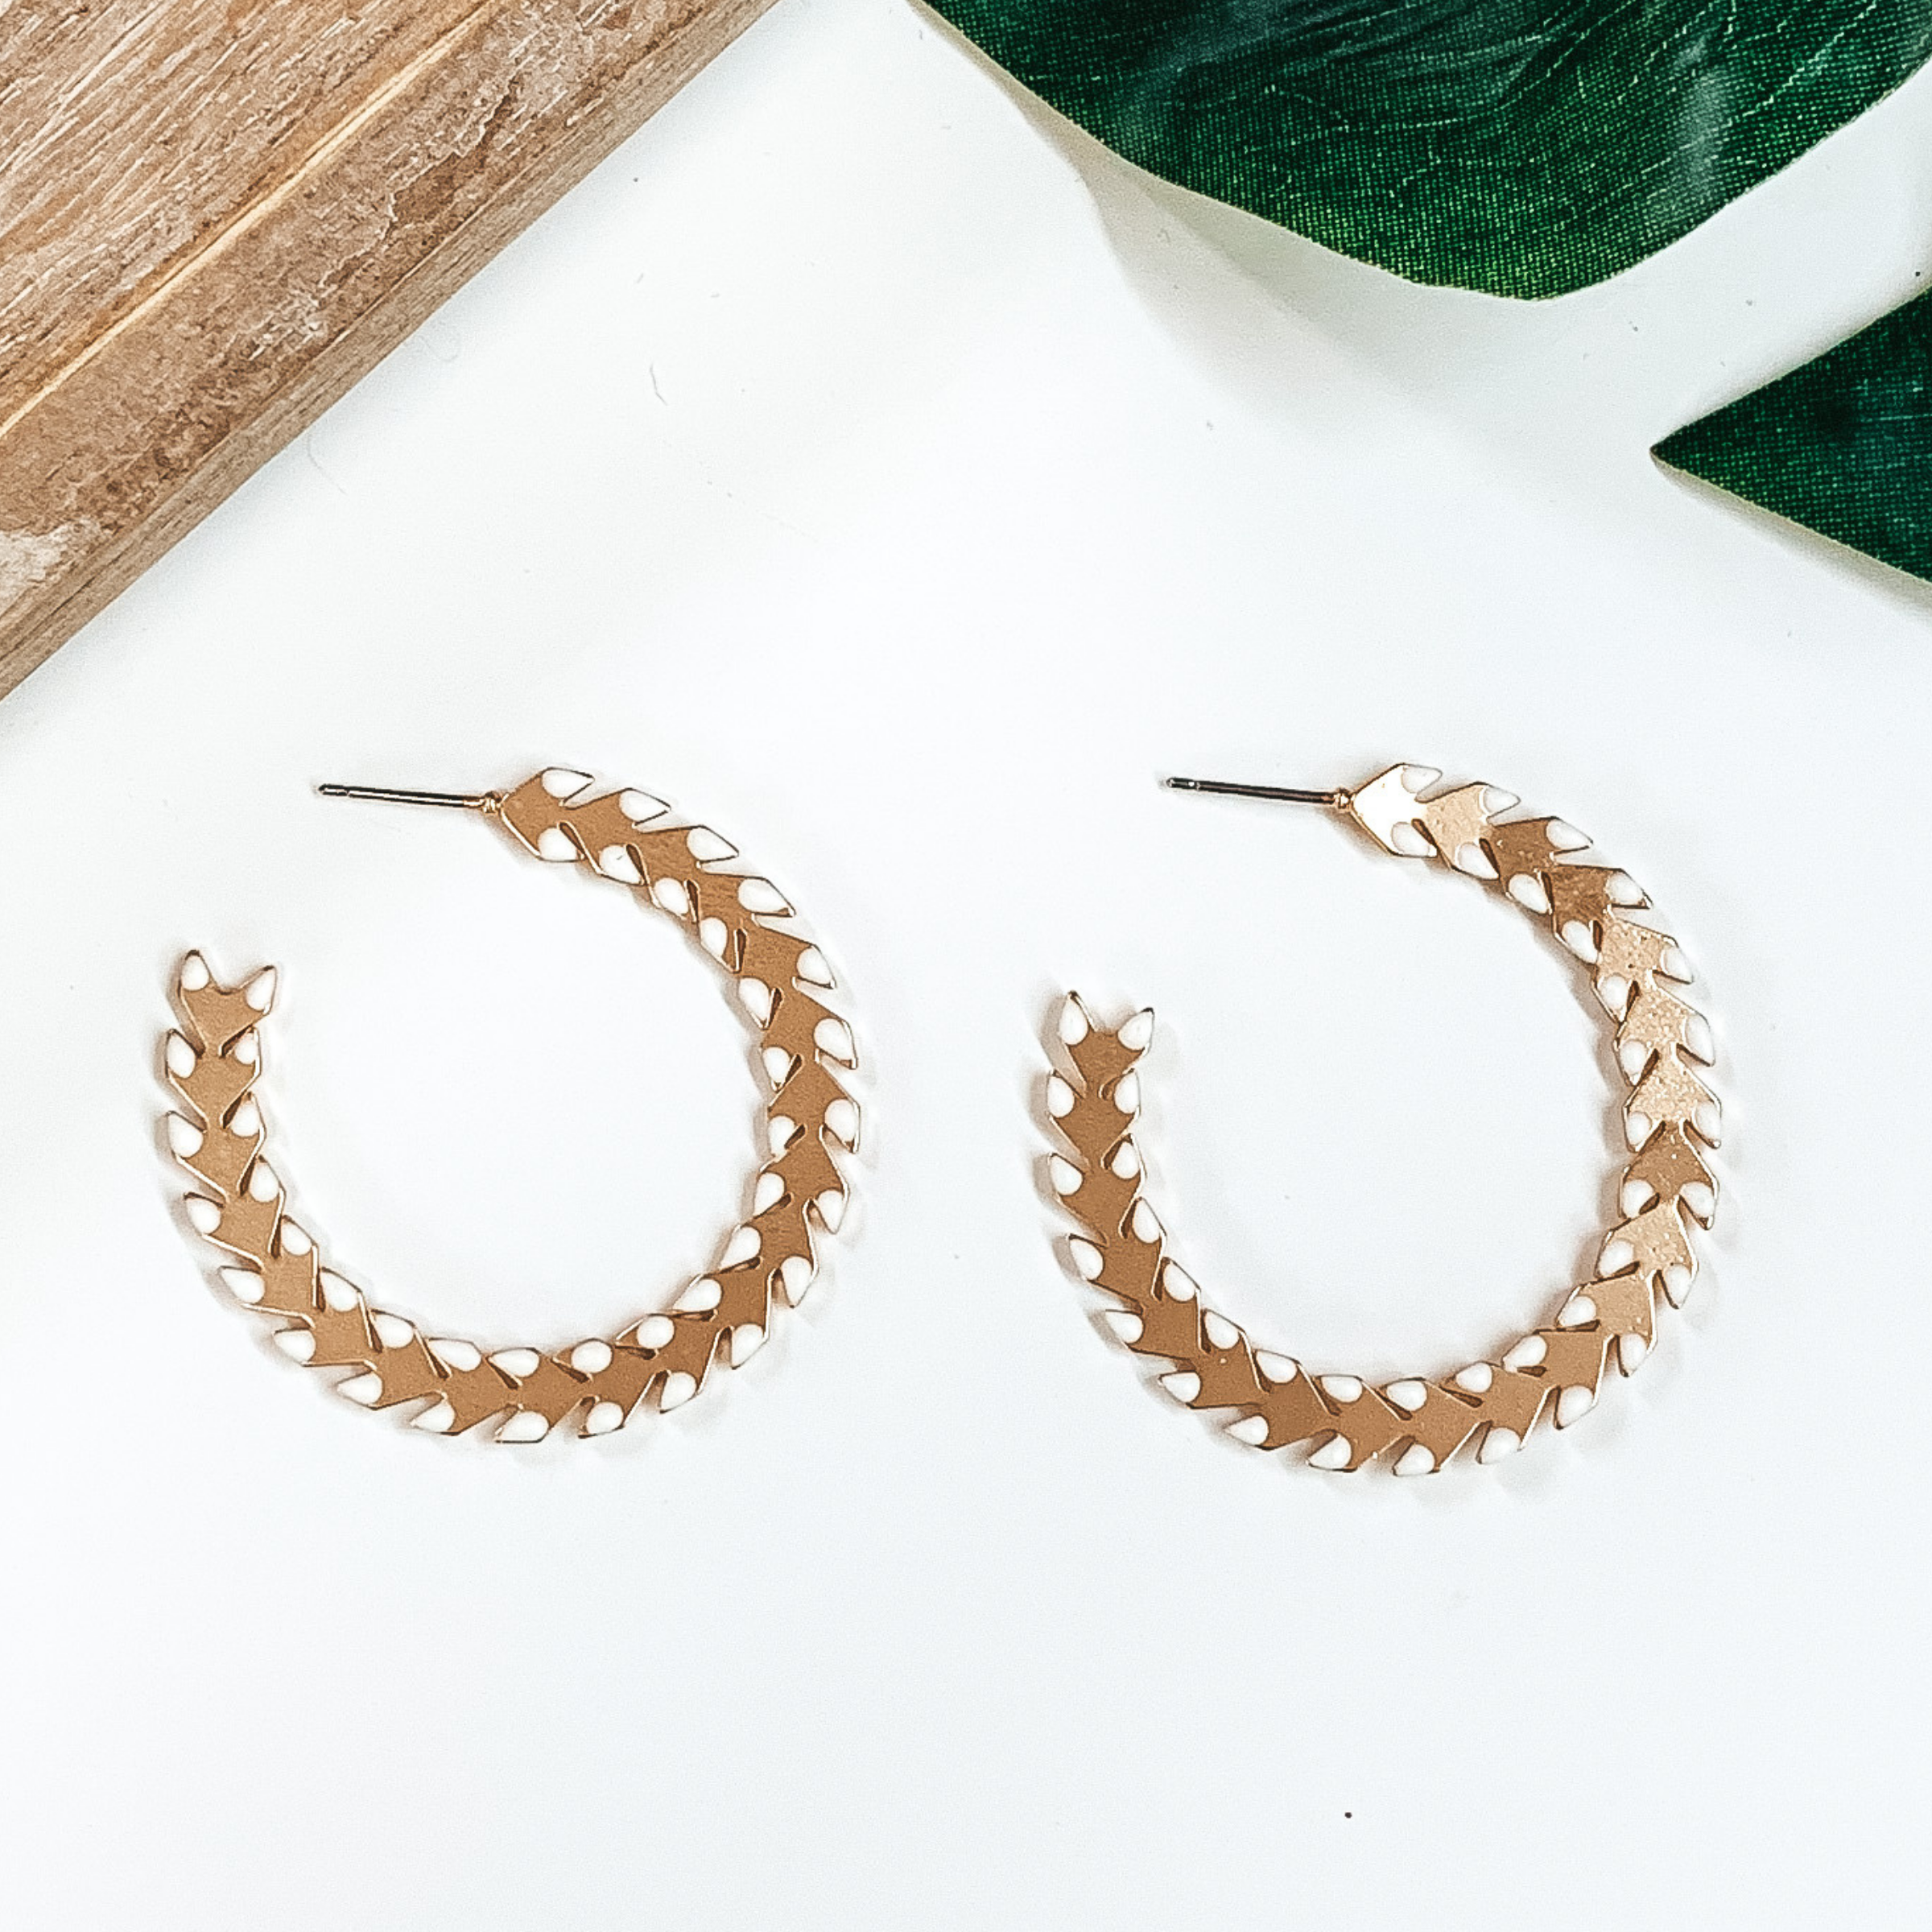 Spiked Hoop Earrings in White and Gold - Giddy Up Glamour Boutique